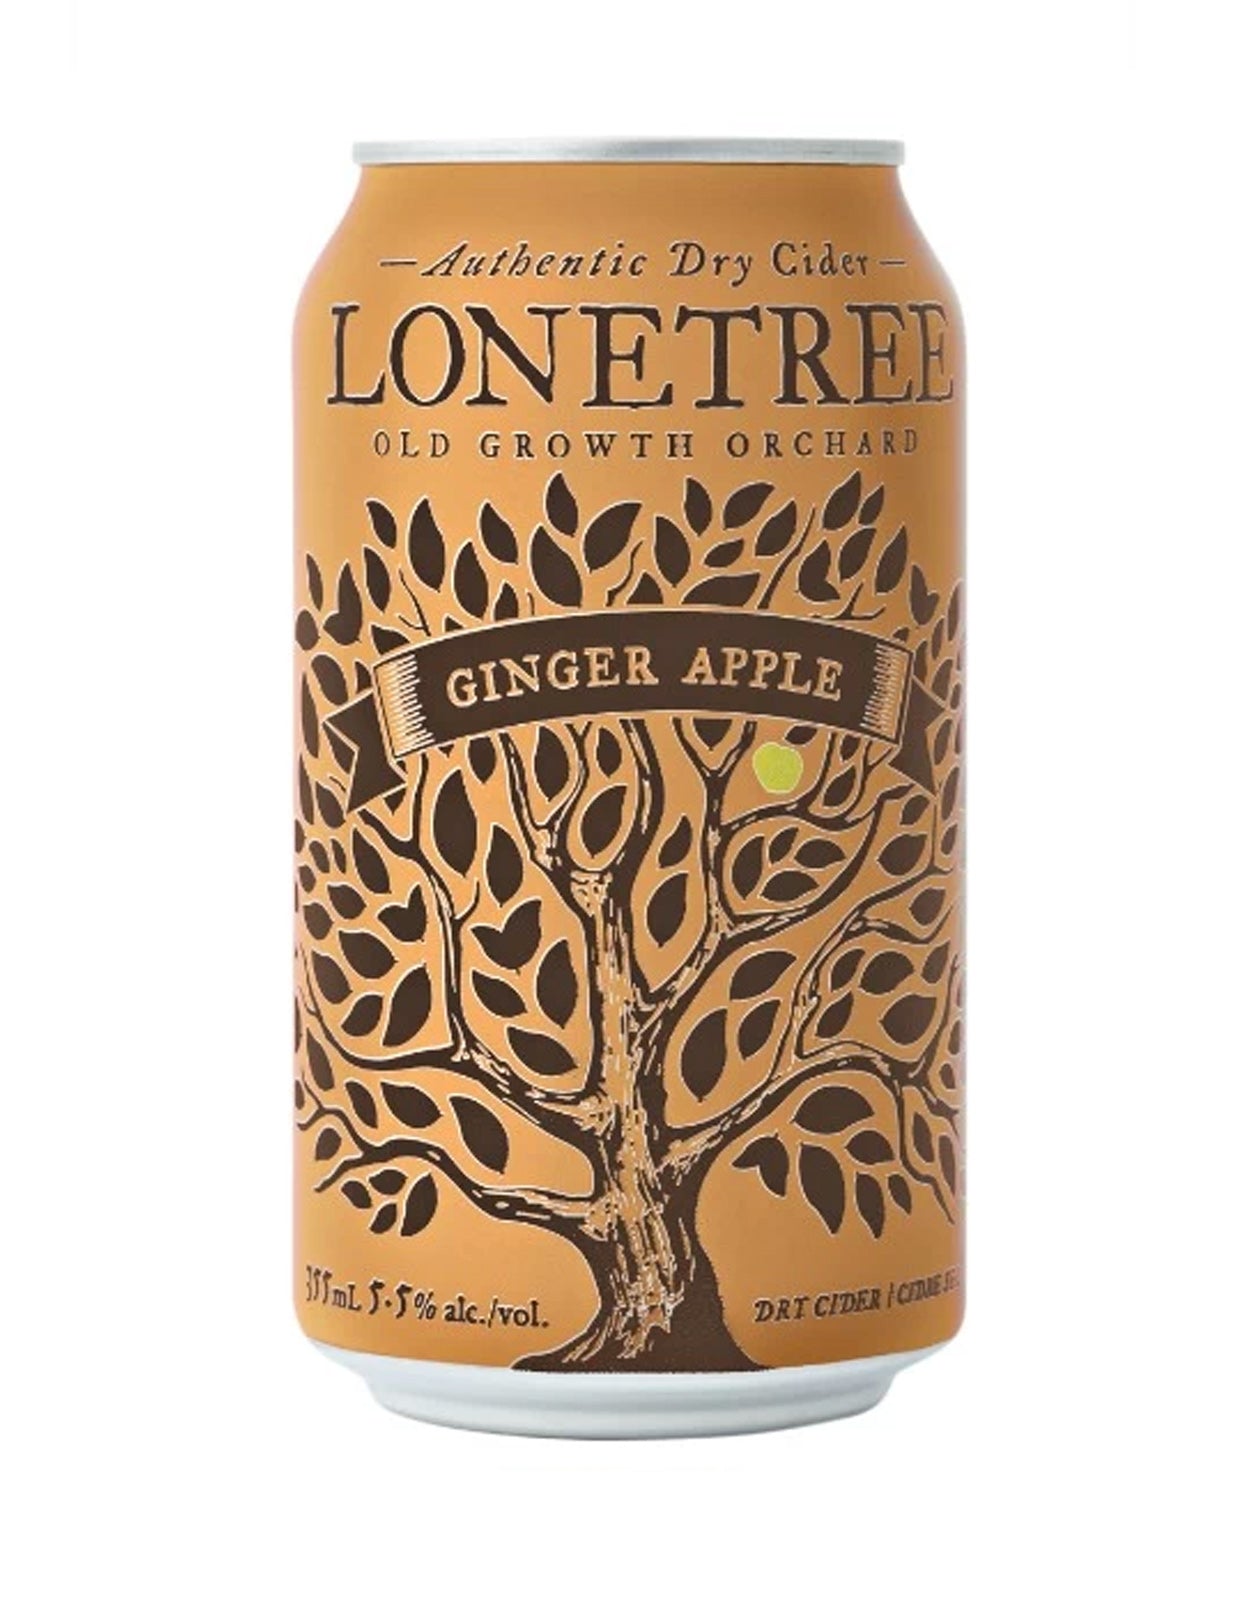 Lonetree Ginger Apple Cider - 6 Cans